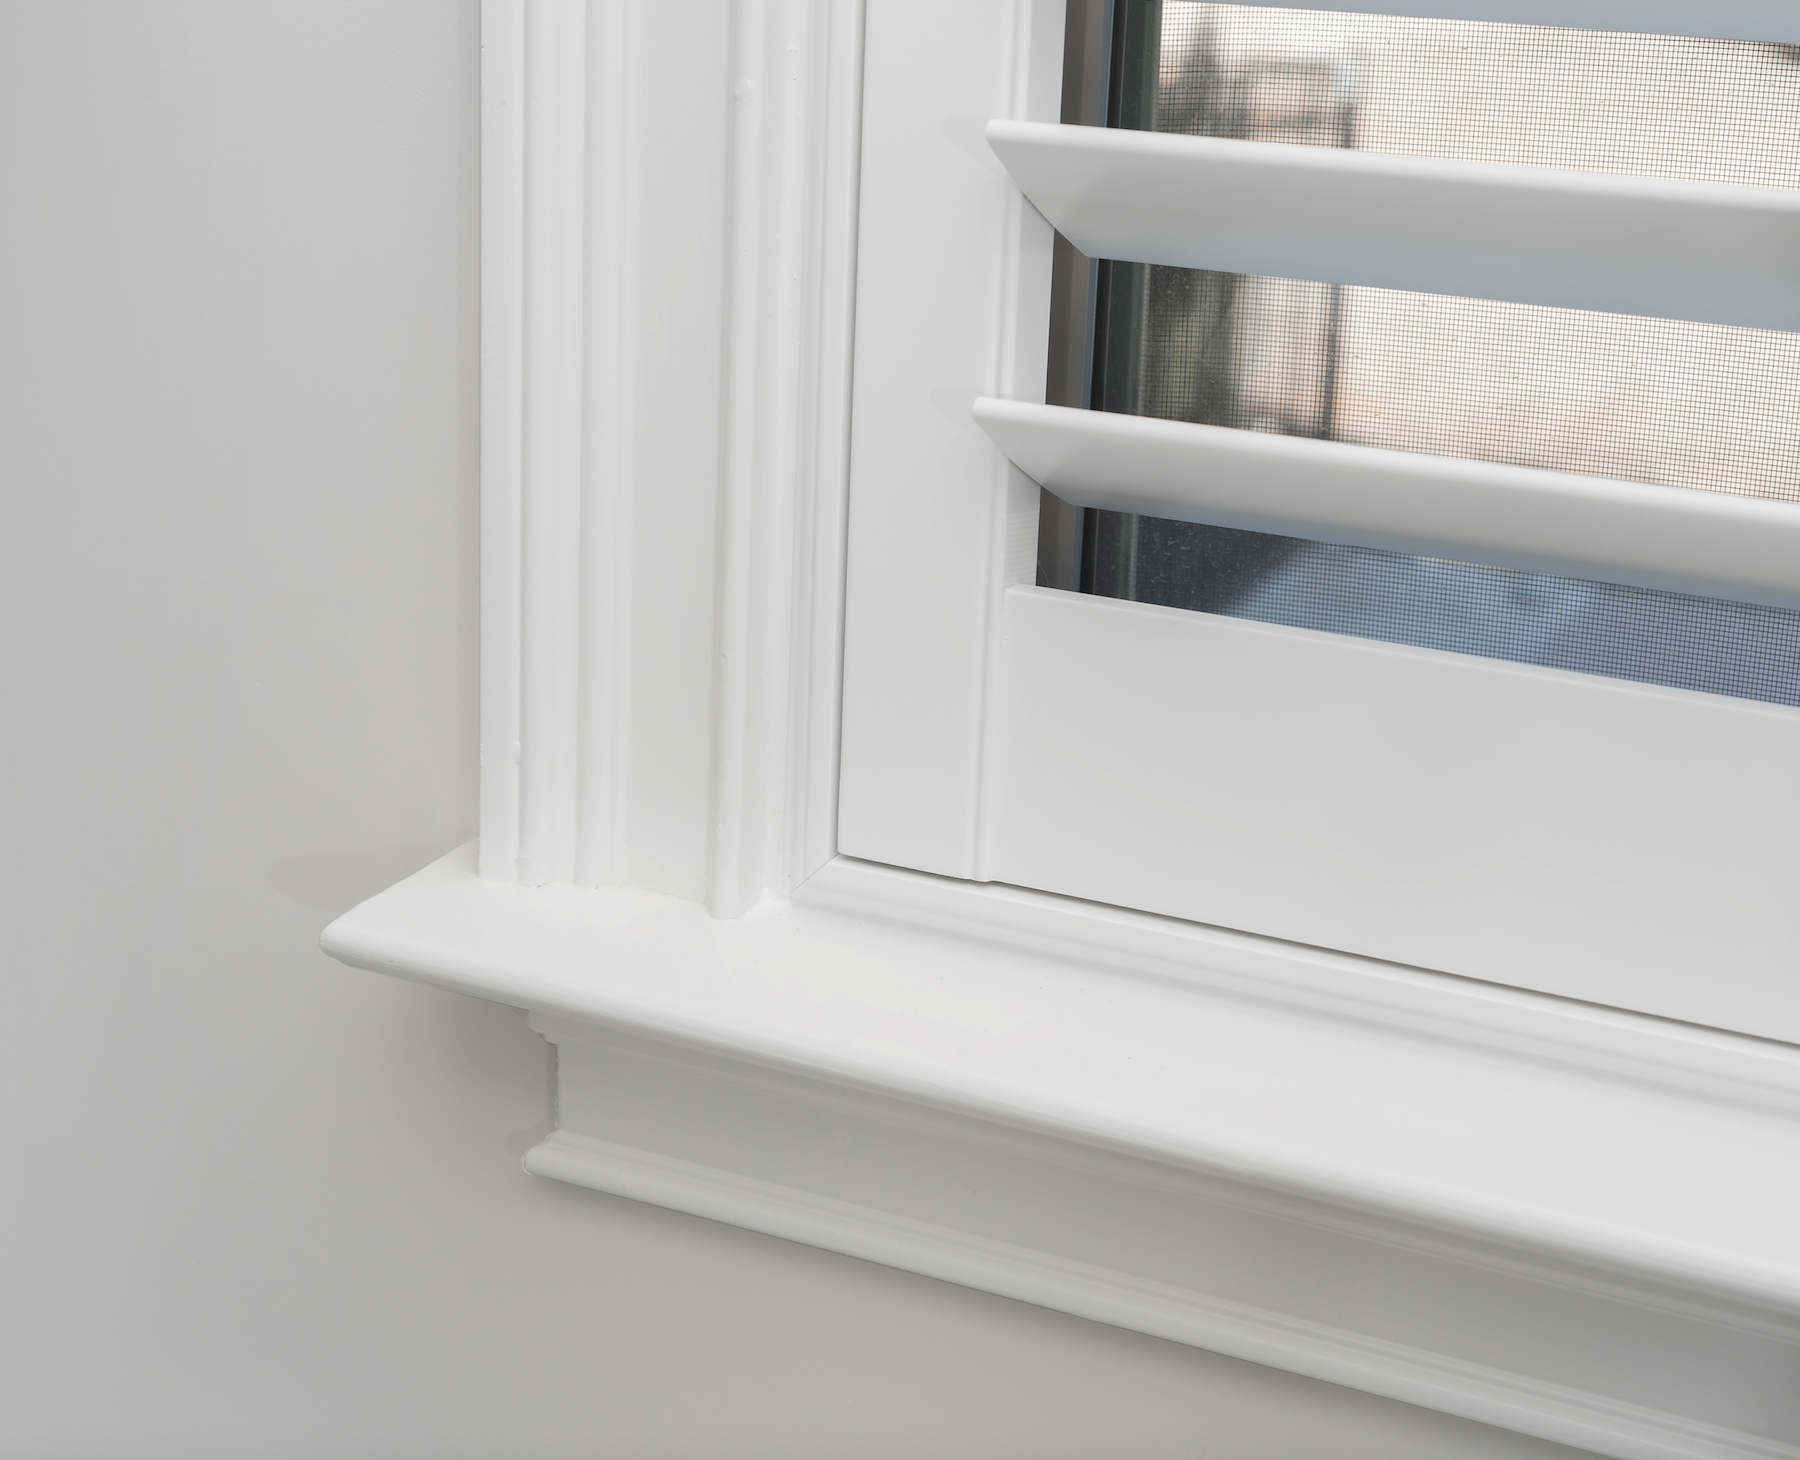 A close up of an inside mount plantation shutter on a window with large RB3 trim casing